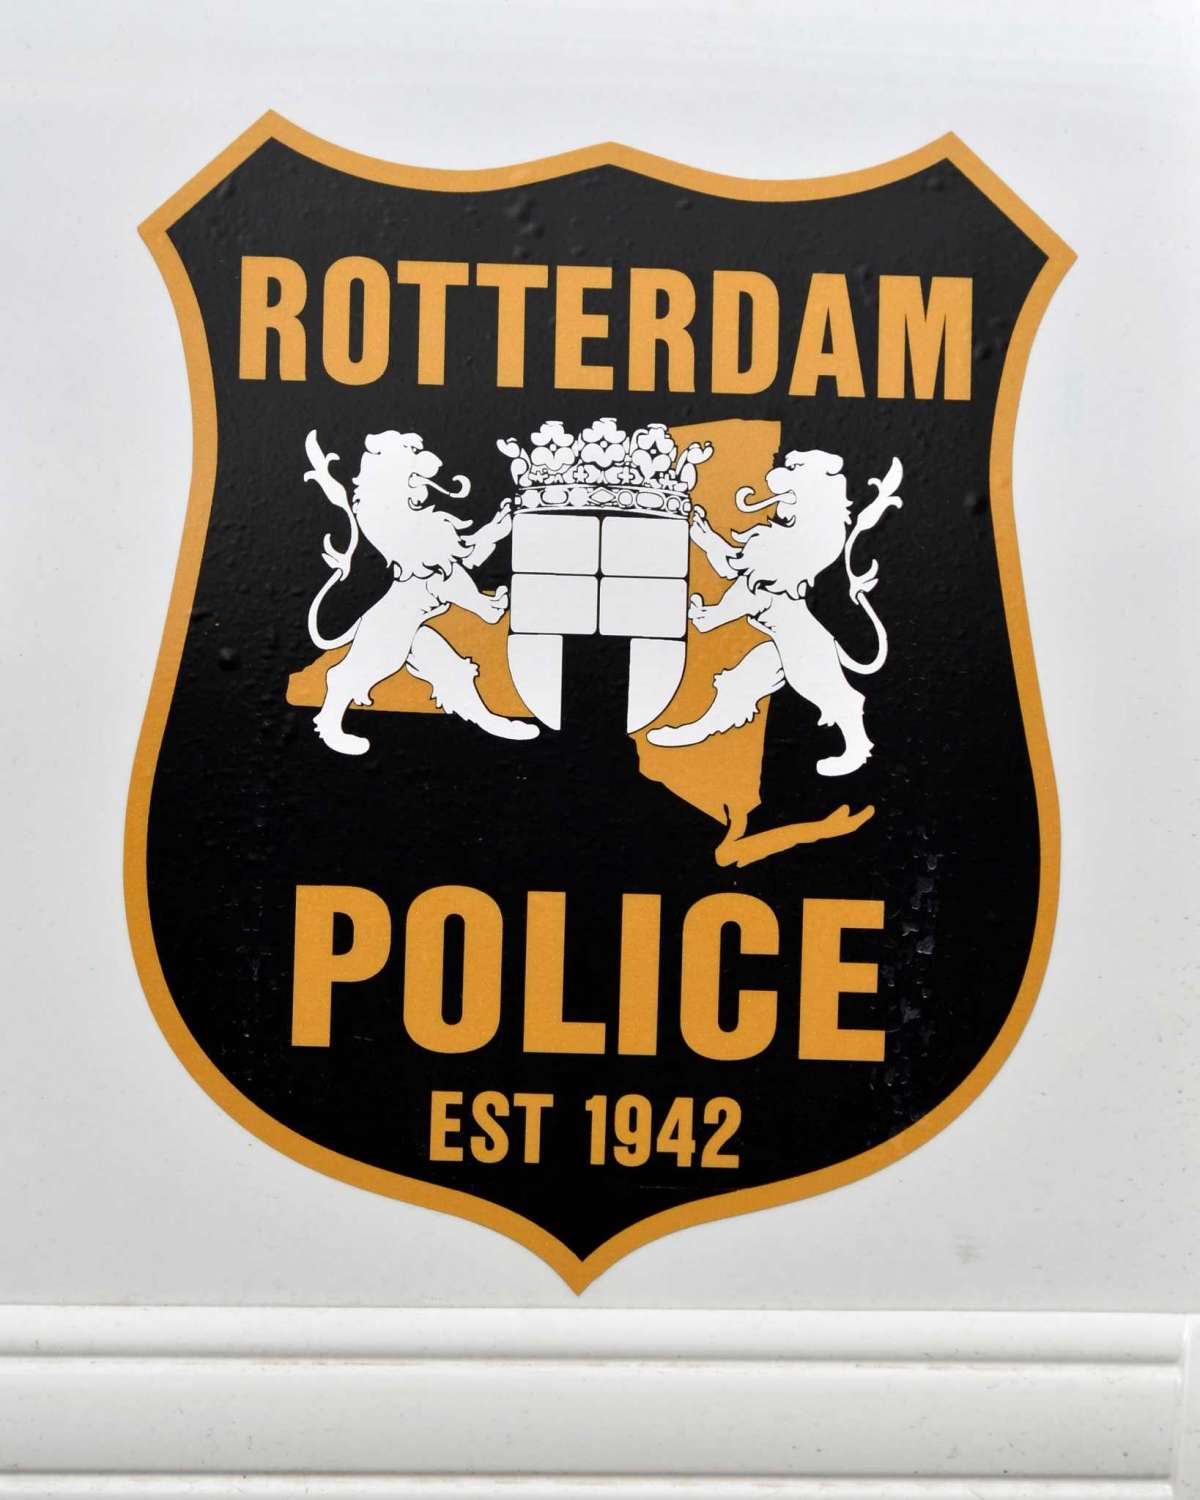 Emblem on a Rotterdam police car in Rotterdam Wednesday Feb. 20, 2013. Police say someone hacked the town's email system in January 2021. (John Carl D'Annibale / Times Union)